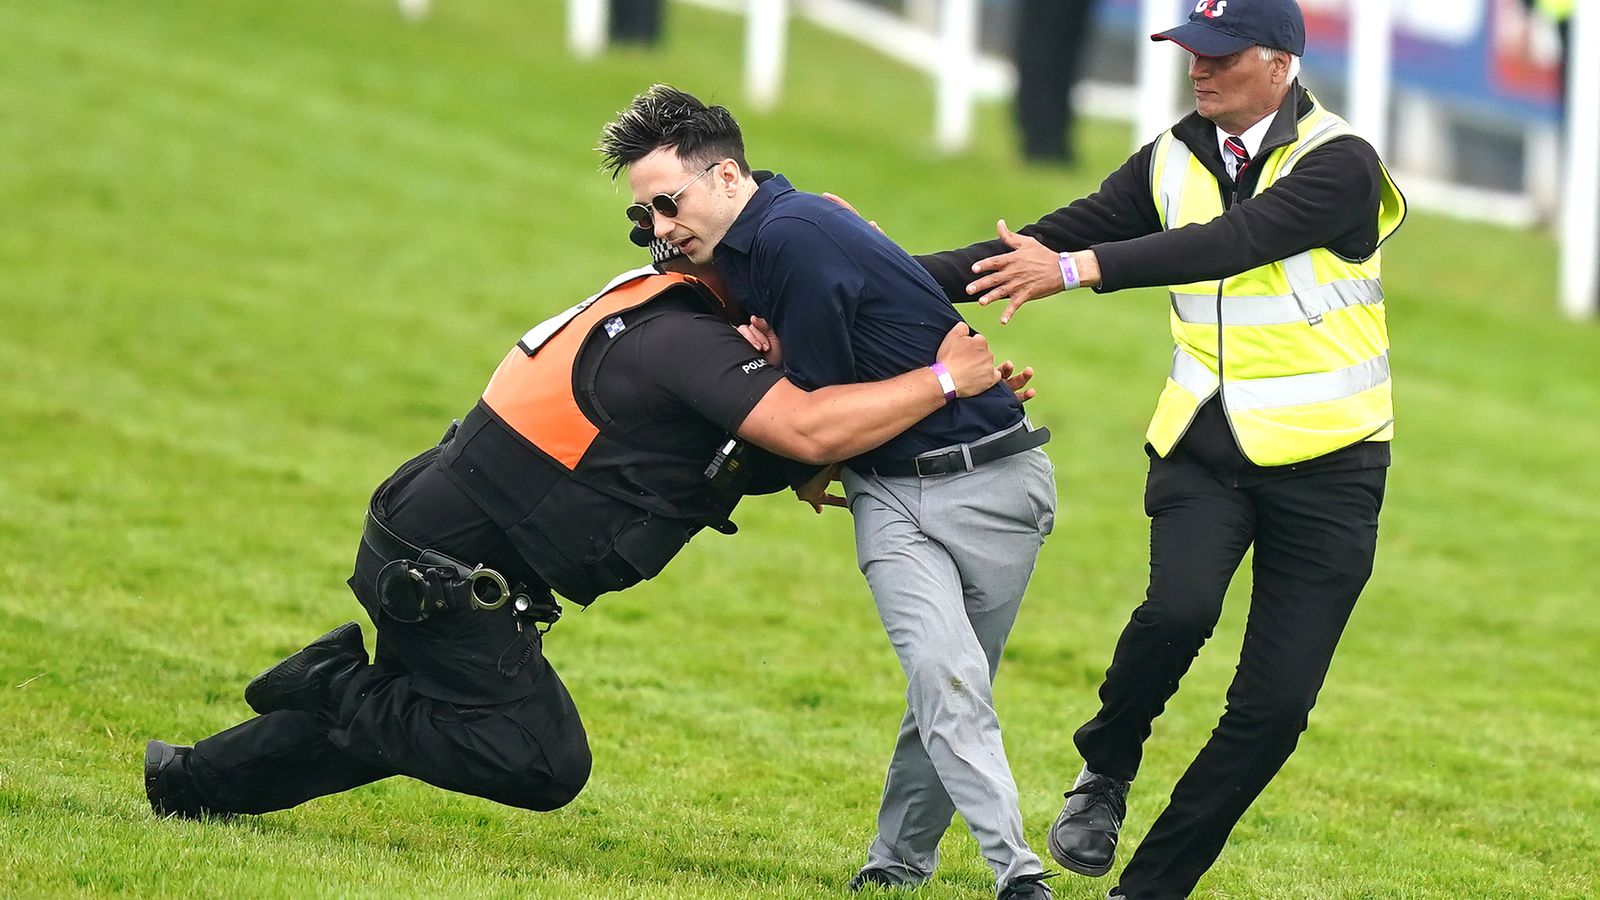 Epsom Derby: Nineteen people arrested over plans to disrupt event - as protester runs on racecourse